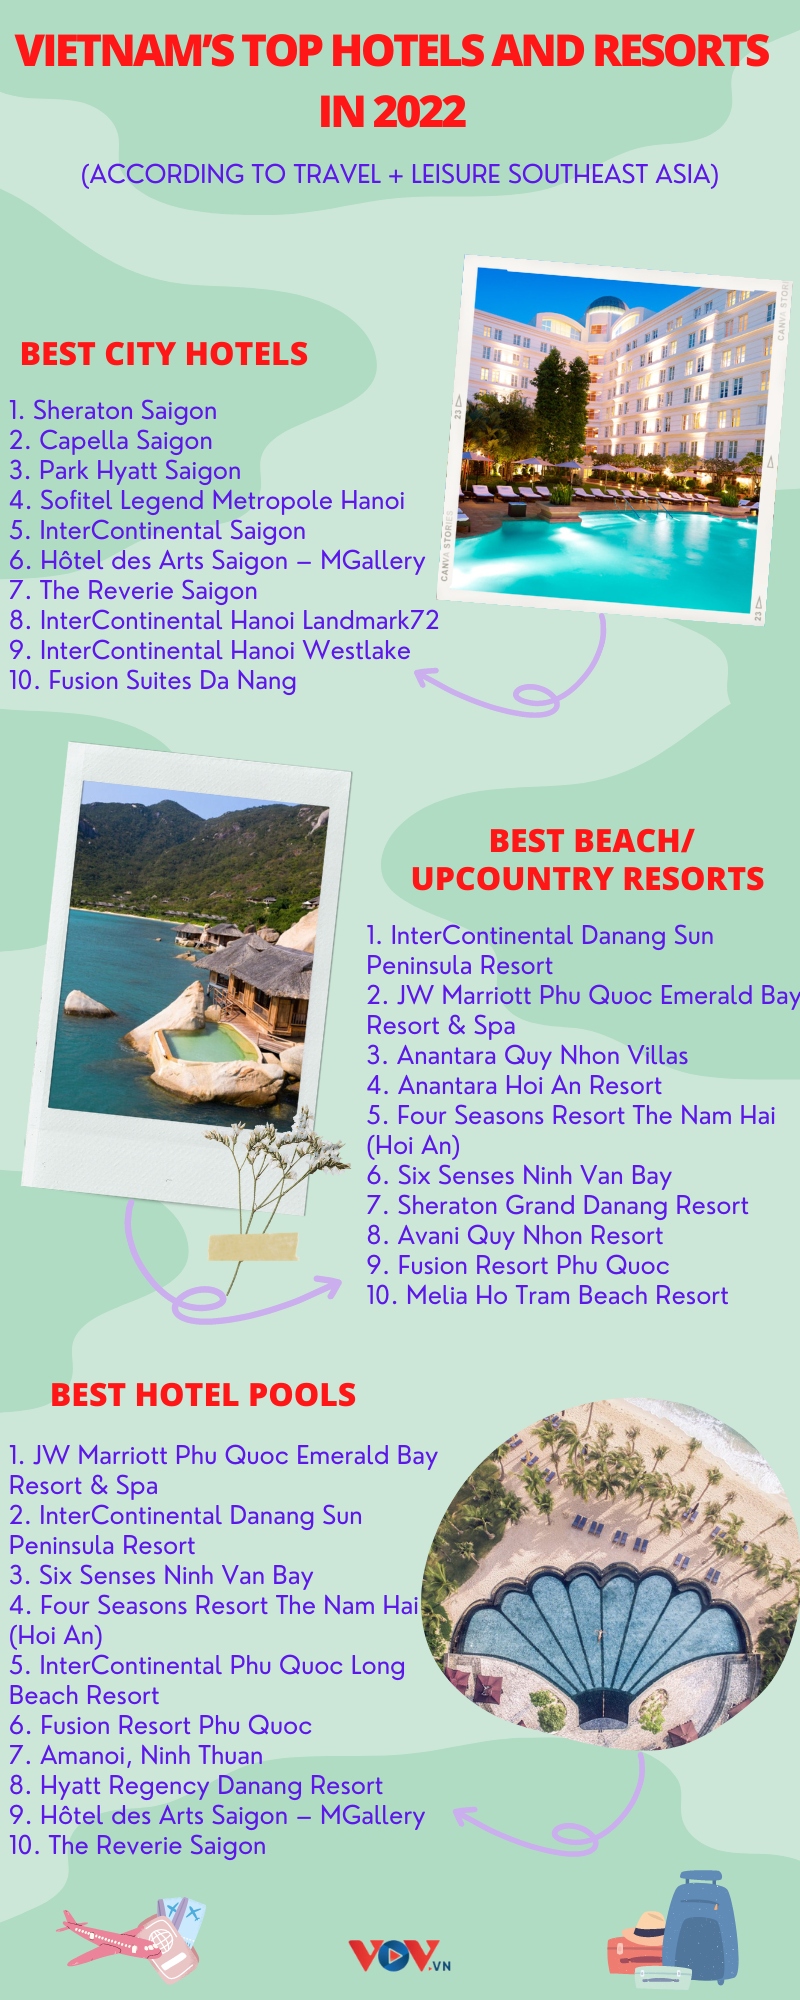 travel leisure honours vietnam s top hotels, resorts in 2022 picture 1